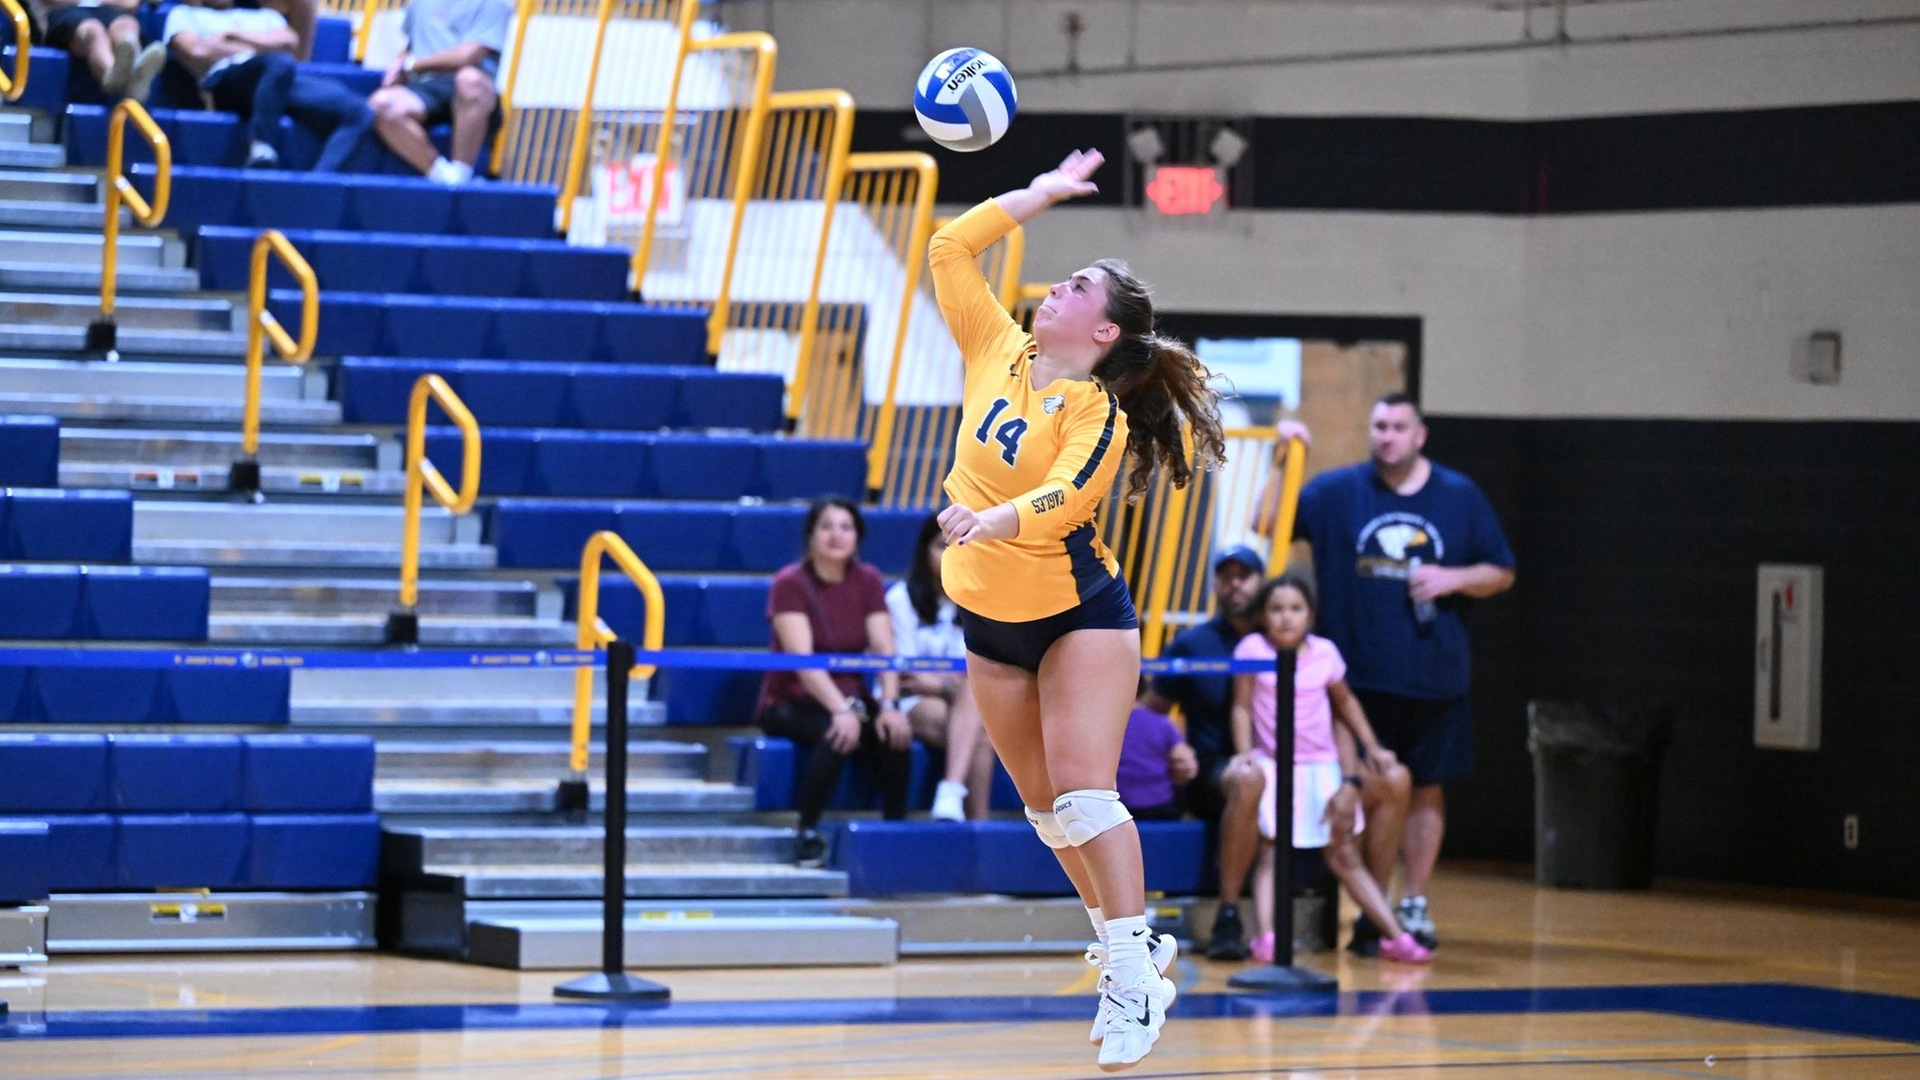 Women's Volleyball Advances to Semis with 3-0 Win Over Old Westbury